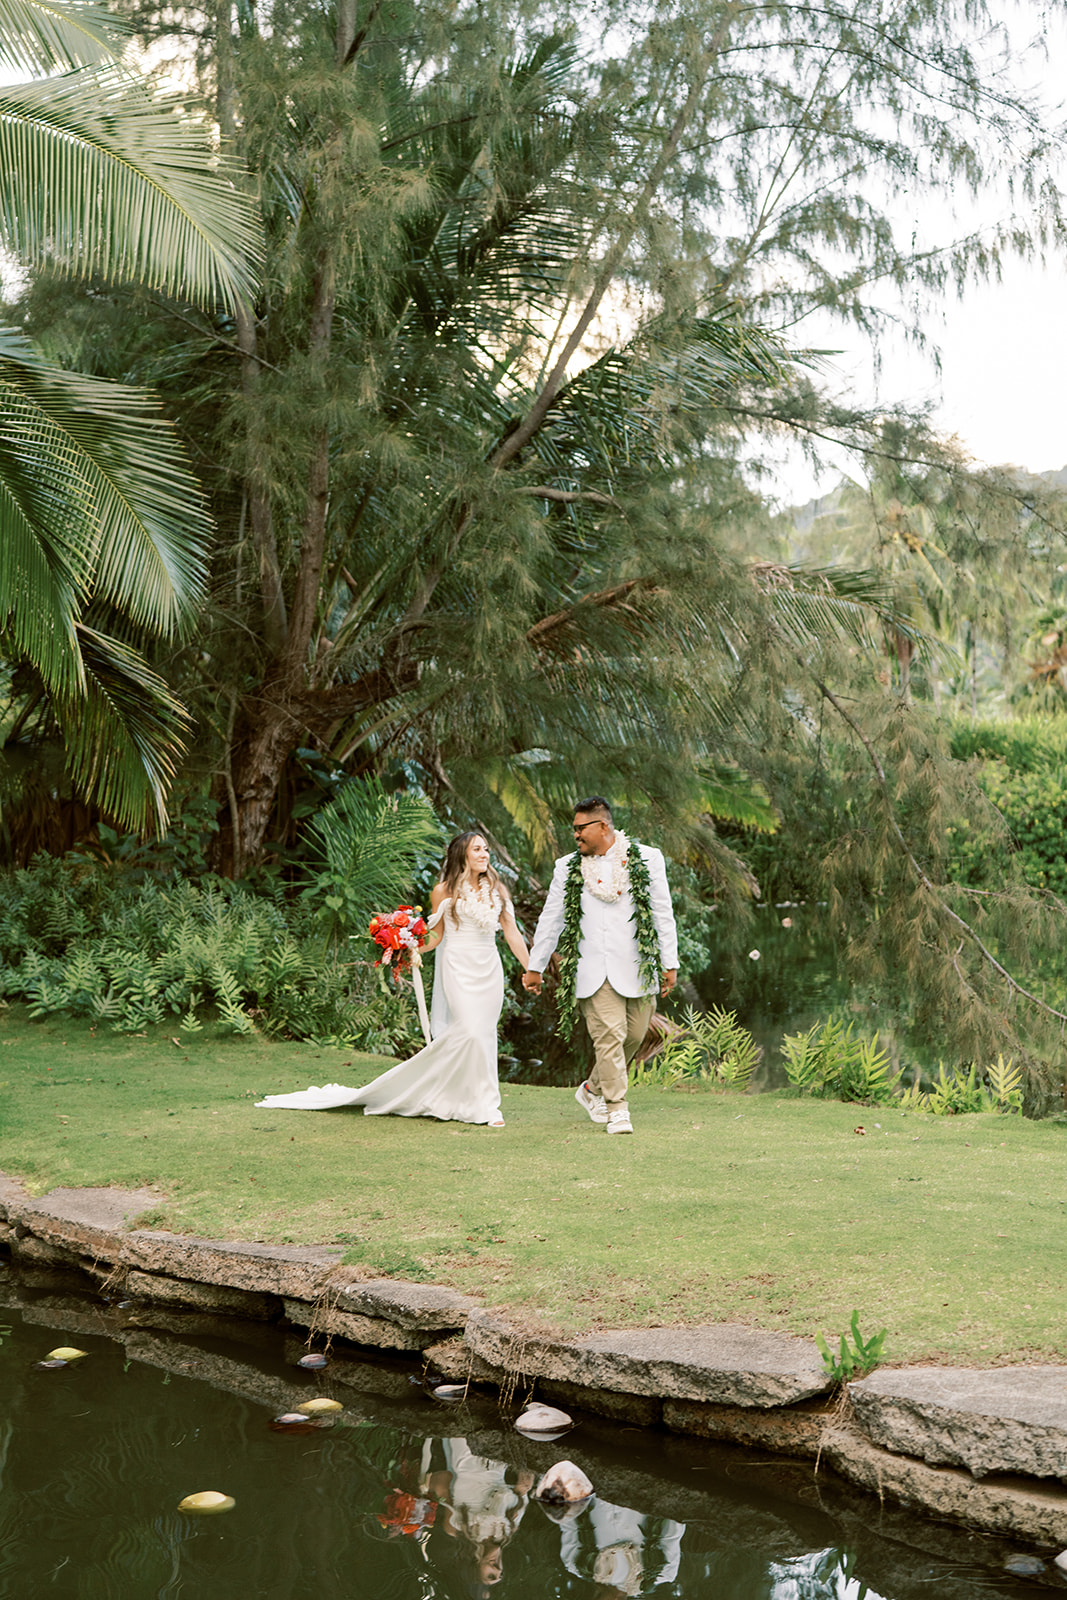 A couple in wedding attire holding hands and walking beside a pond in a lush garden setting of their Hawaiian Wedding